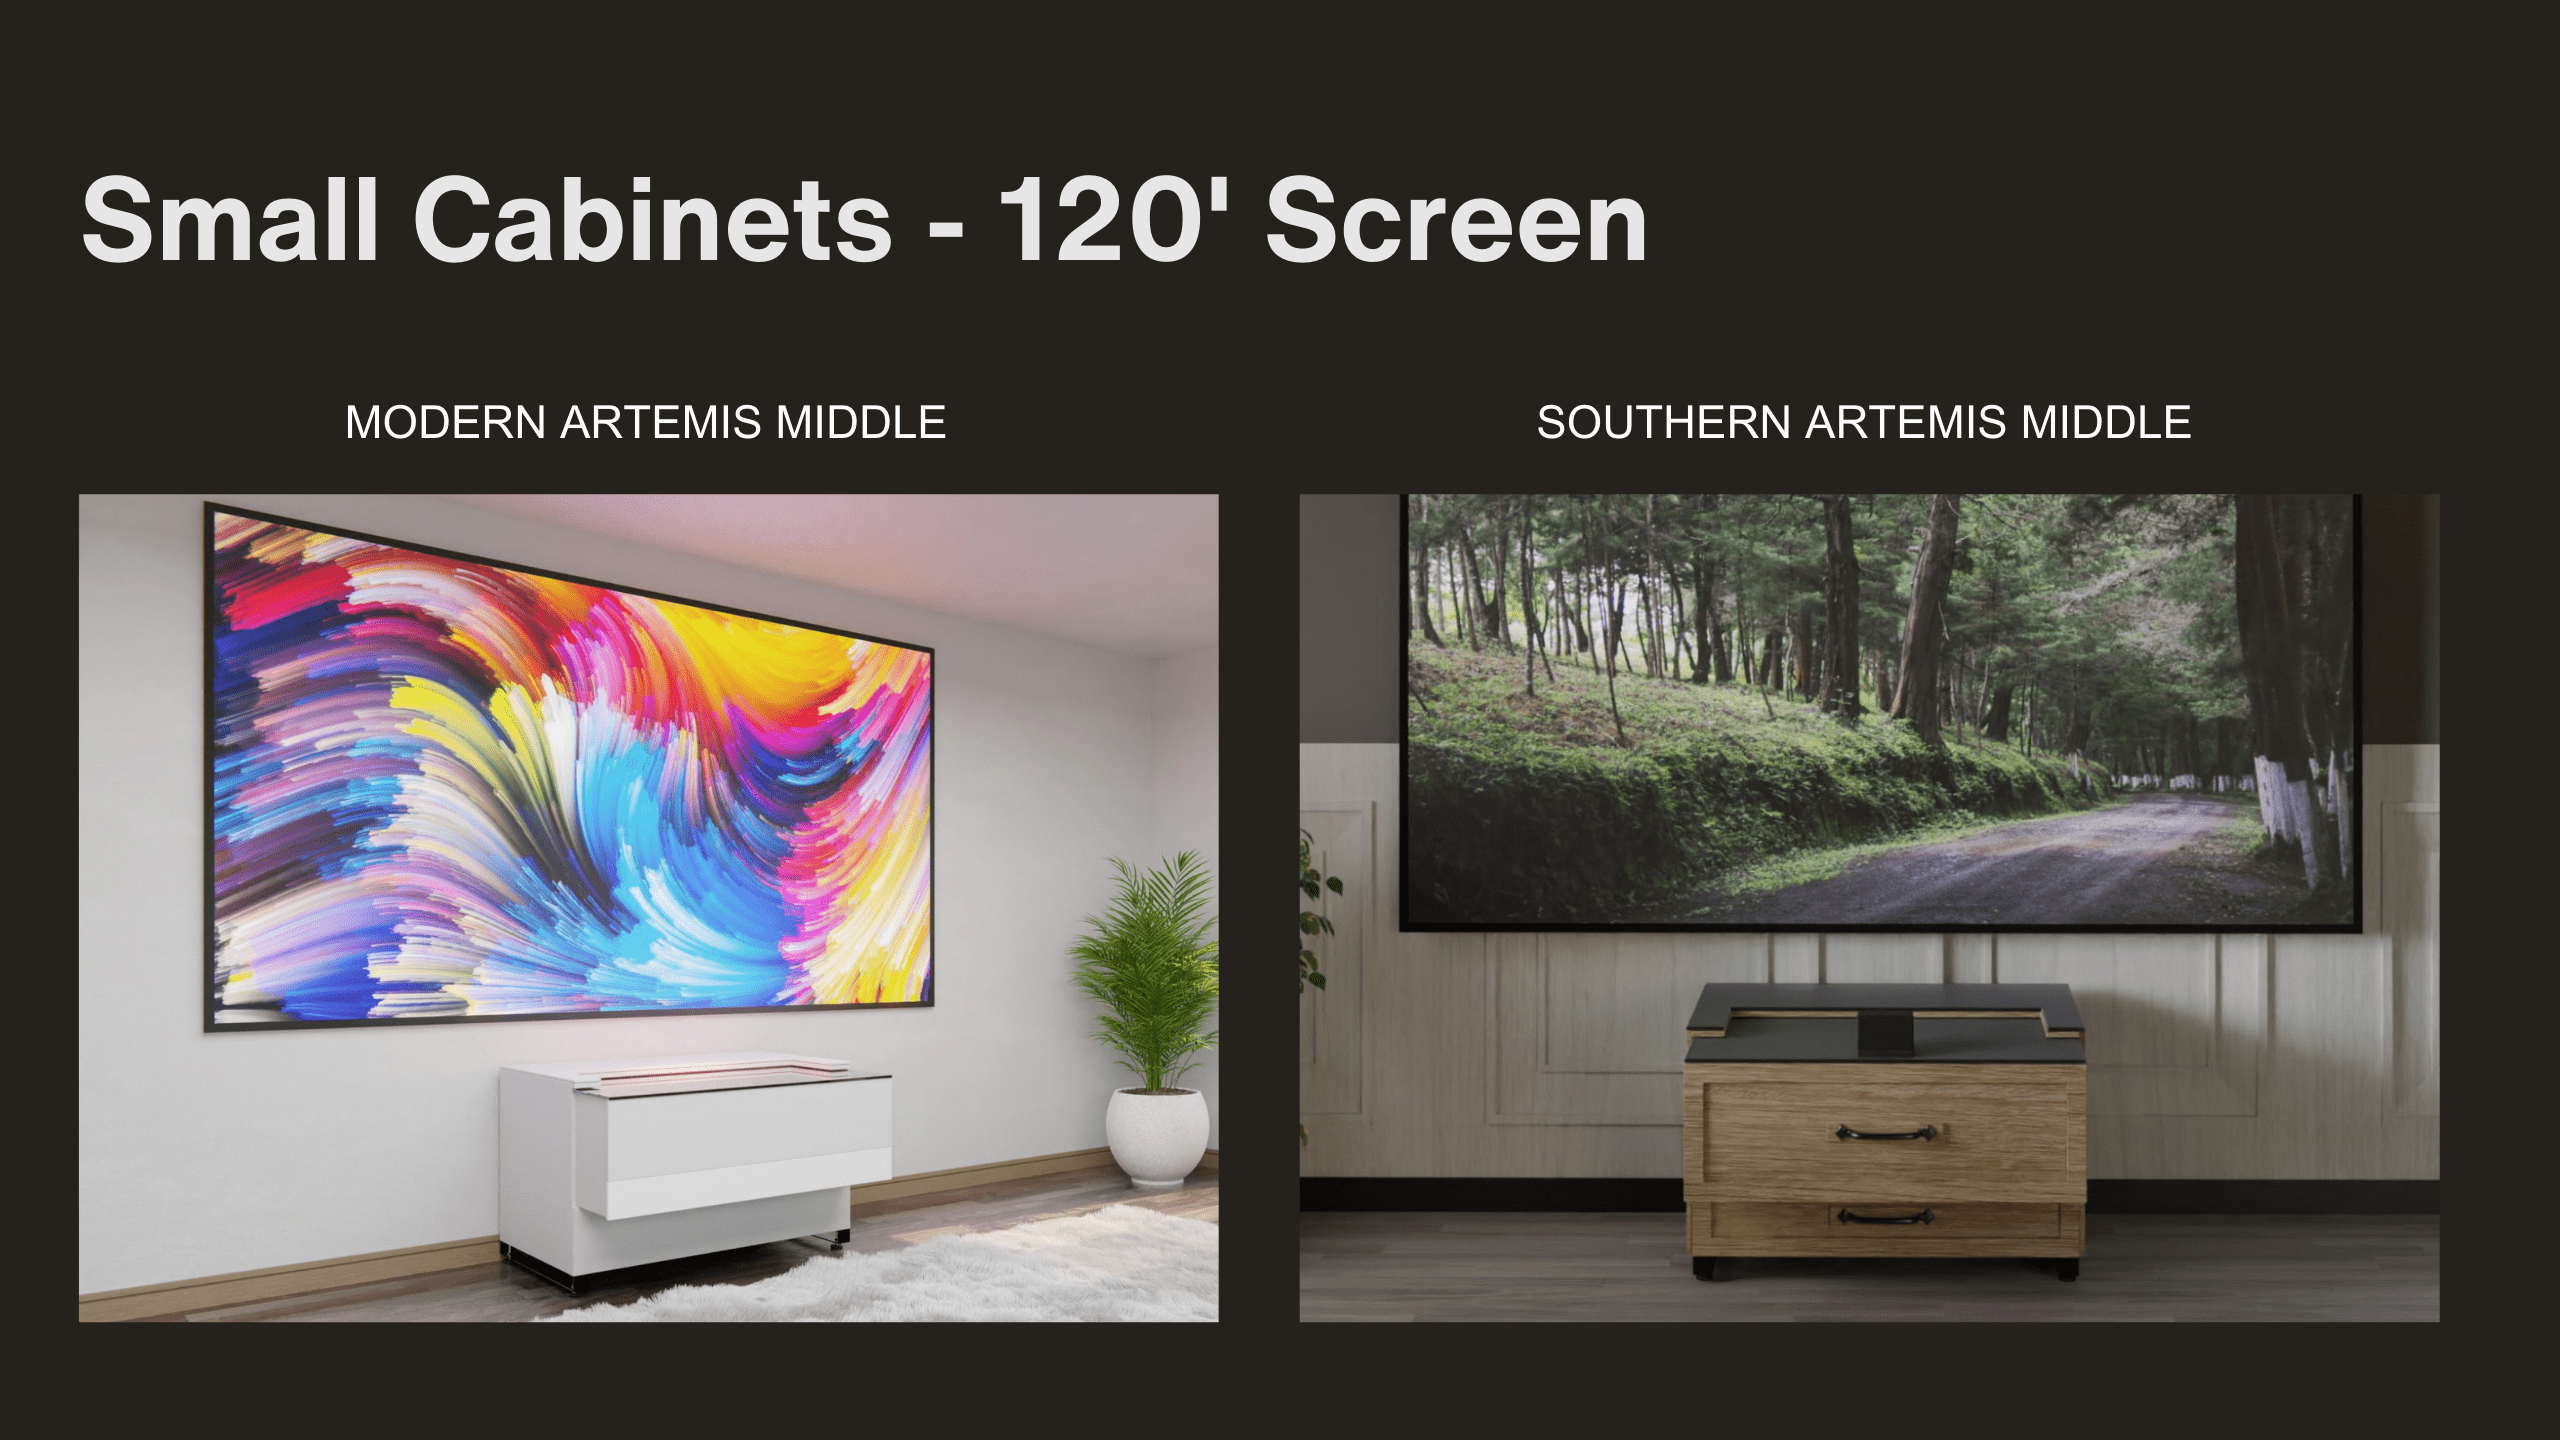 Small Cabinets | 120' Screen | Artemis Middle | Aegis AV Cabinets